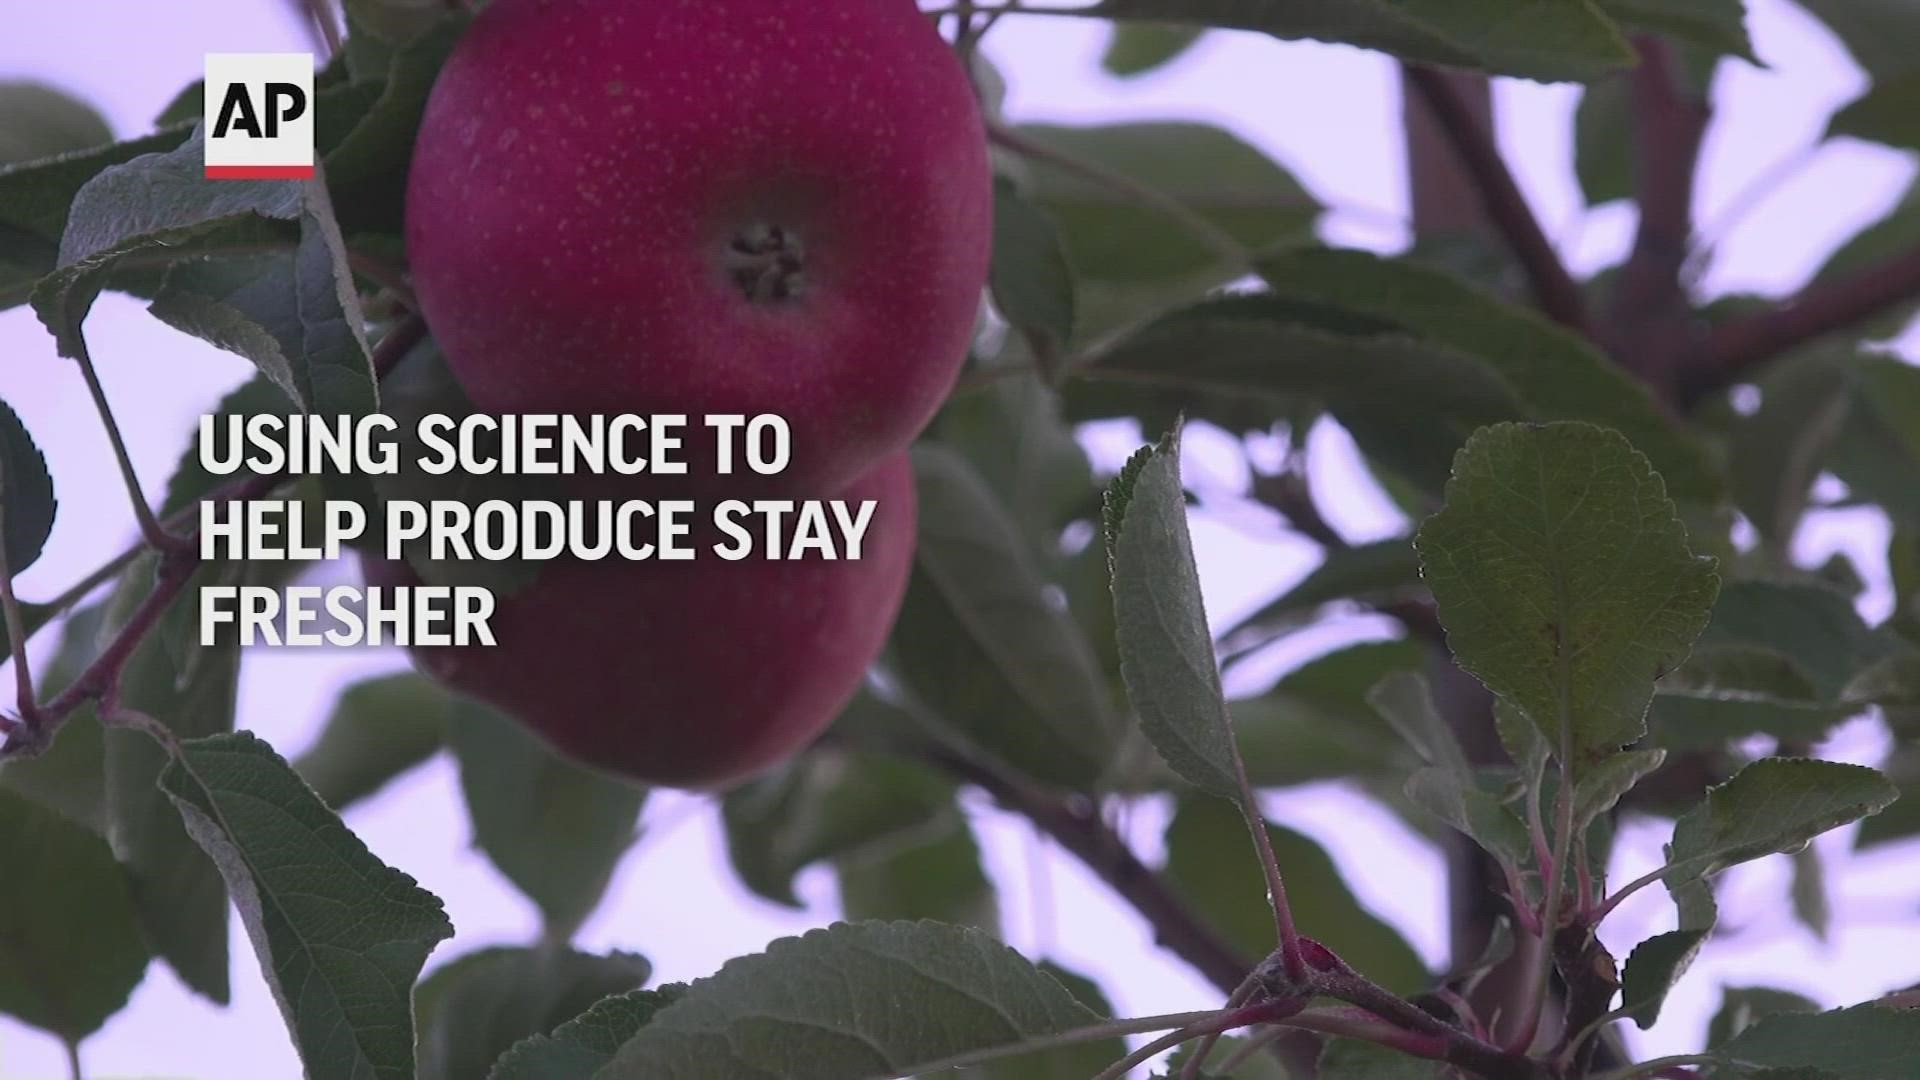 Companies are using eco-friendly science to try to keep produce fresher — and prevent food waste.